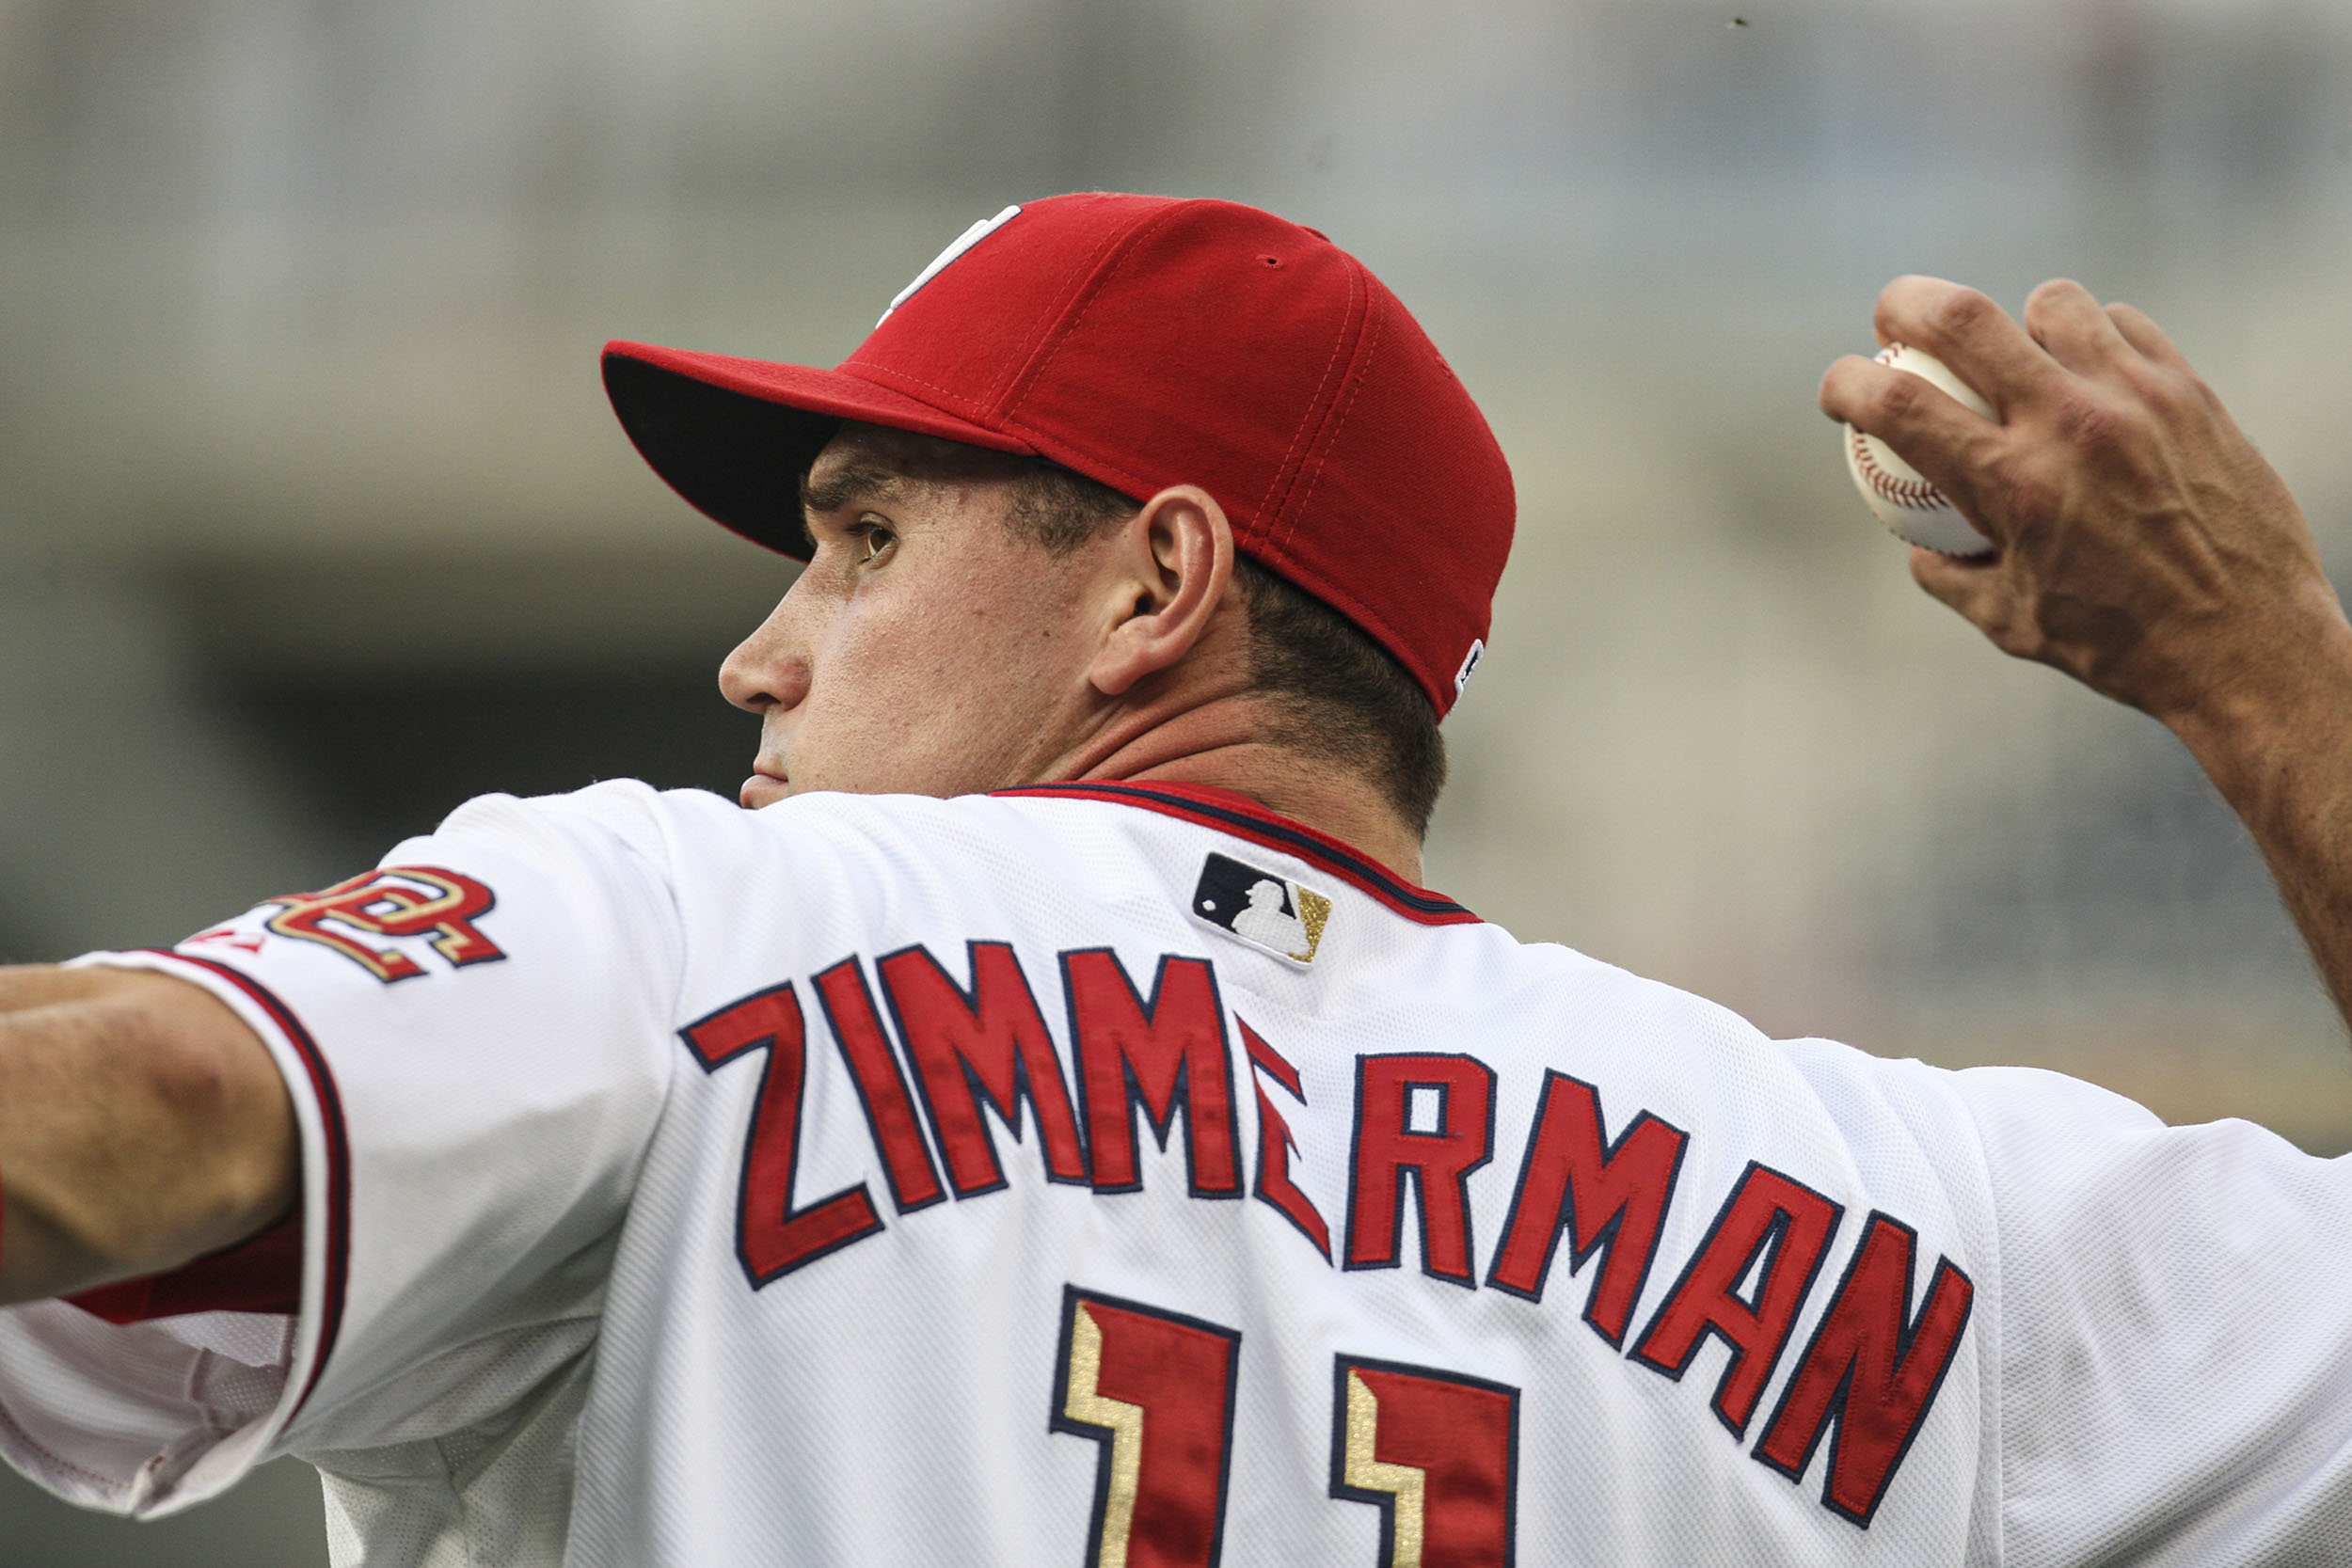 UVA Baseball Coach Brian O'Connor Says Ryan Zimmerman Was a One of